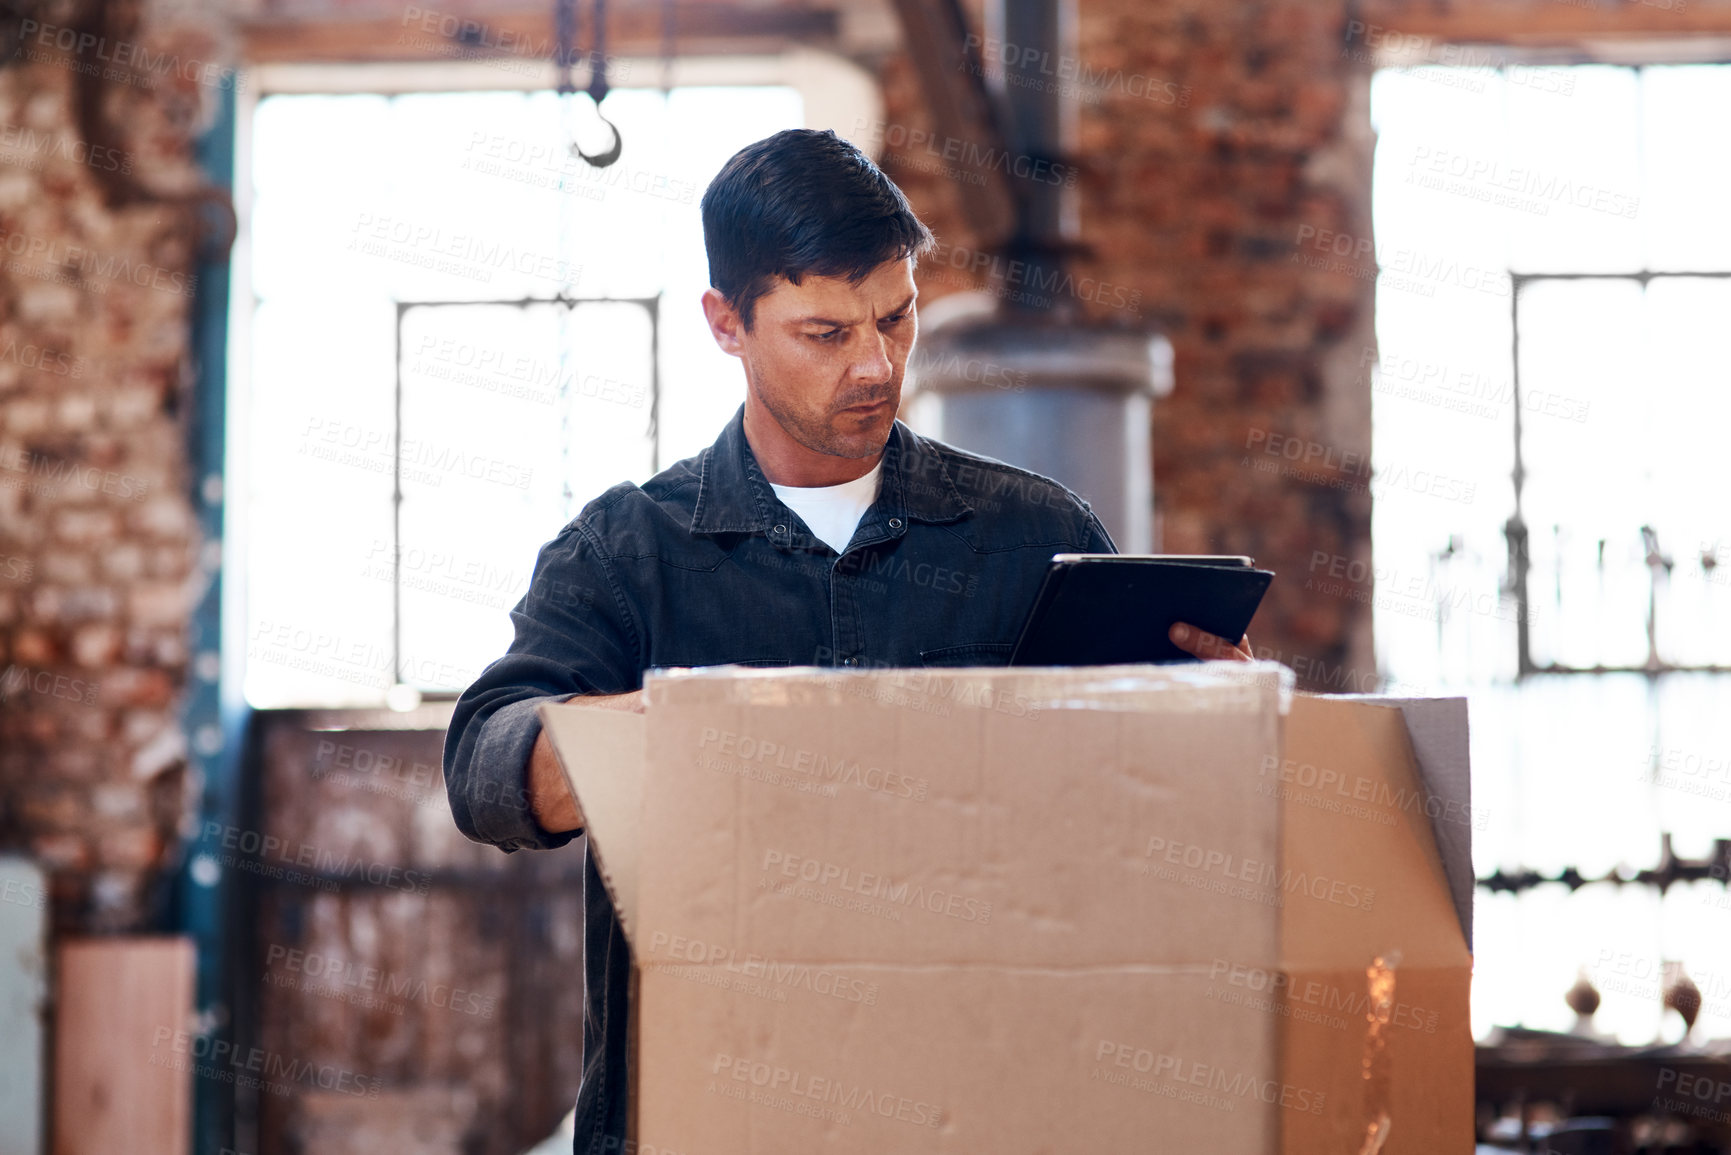 Buy stock photo Cropped shot of a young businessman using a digital tablet while sorting out orders and deliveries inside his workshop